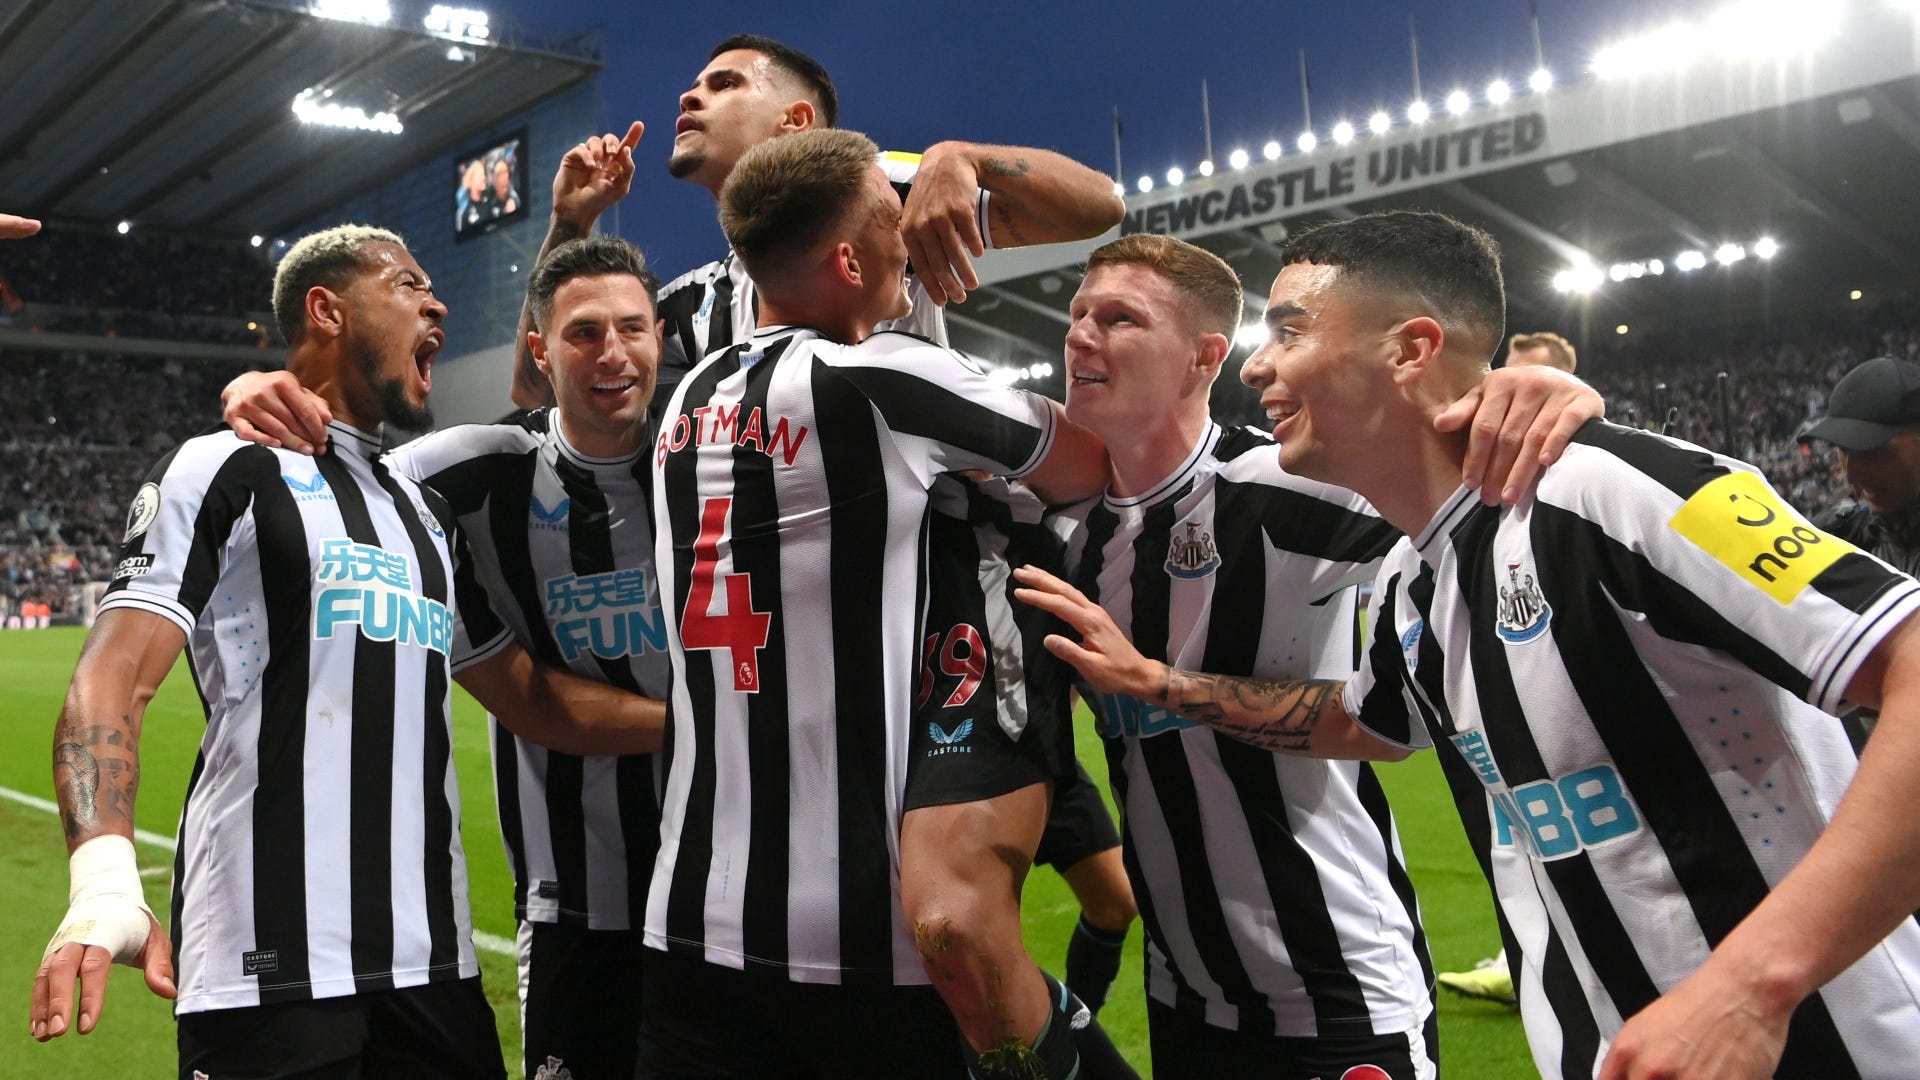 Newcastle vs Leicester Where to watch the match online, live stream, TV channels, and kick-off time Goal US